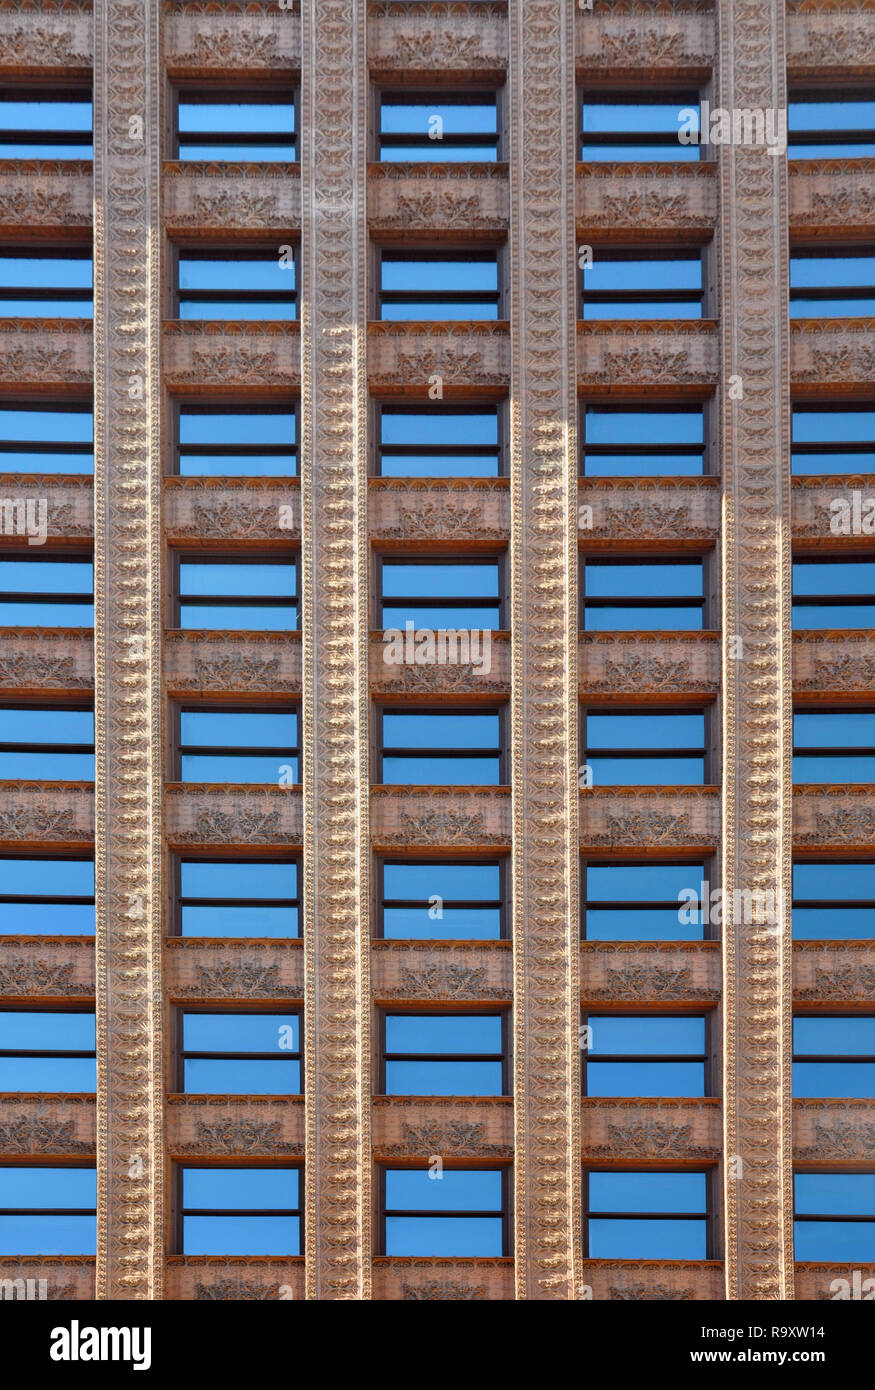 Rows of Windows of the Front Facade of the Guaranty Trust Building by Louis Sullivan and Dankmar Adler, Downtown Buffalo, NY Stock Photo